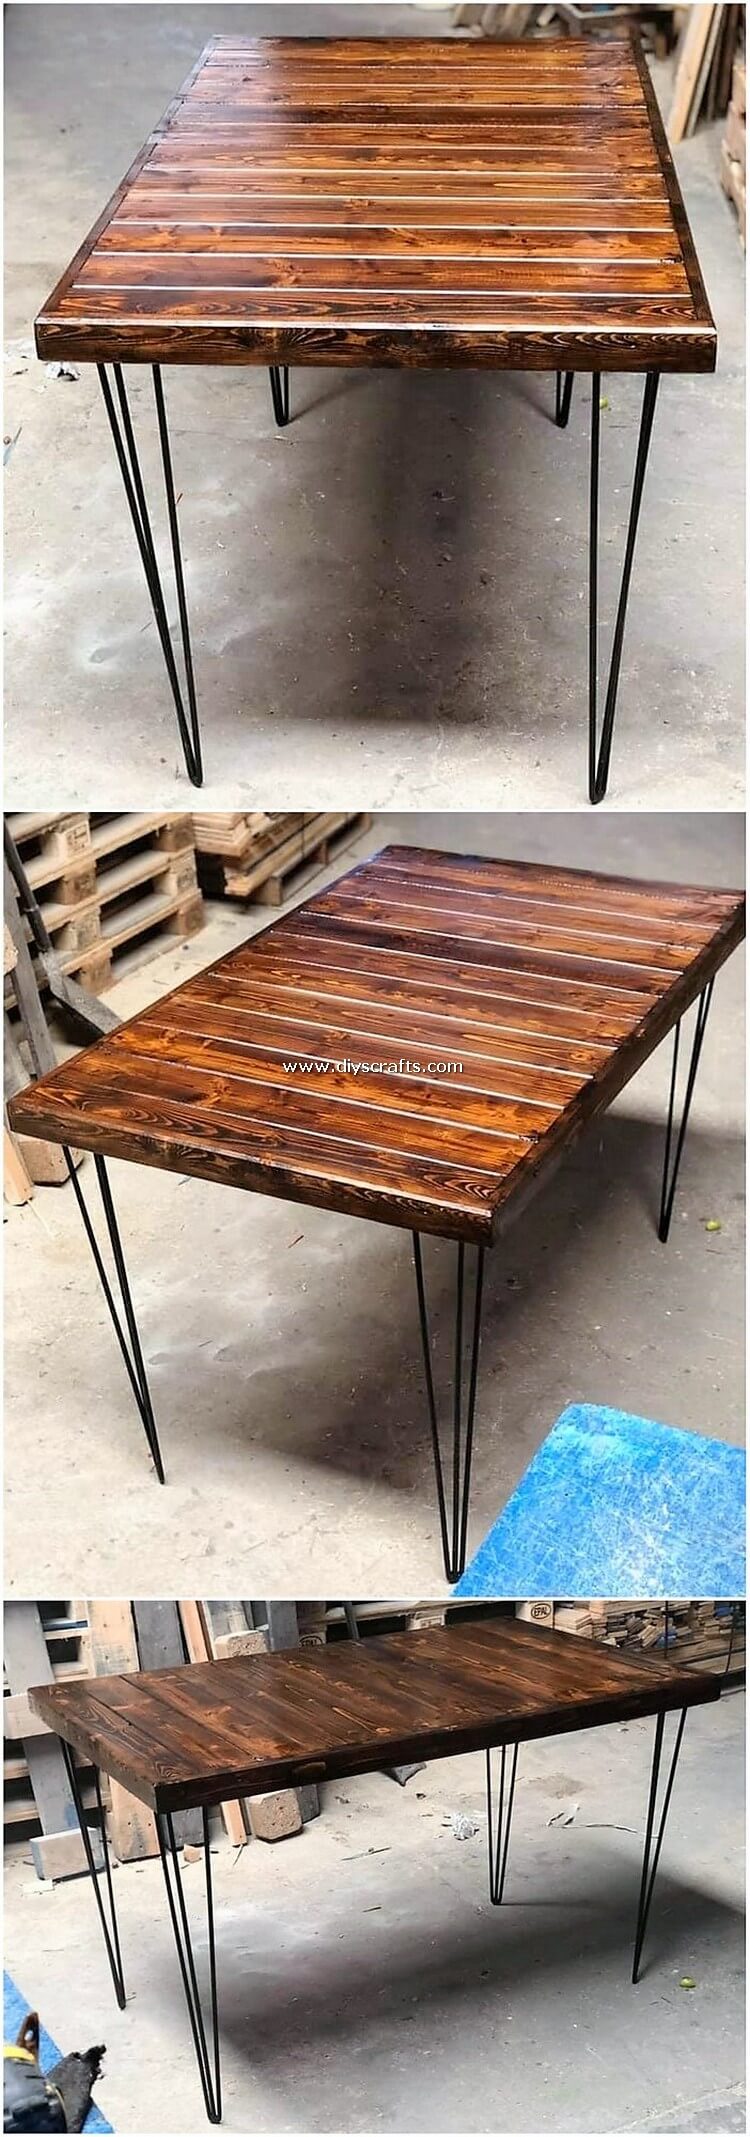 Pallet-Wood-Table-2